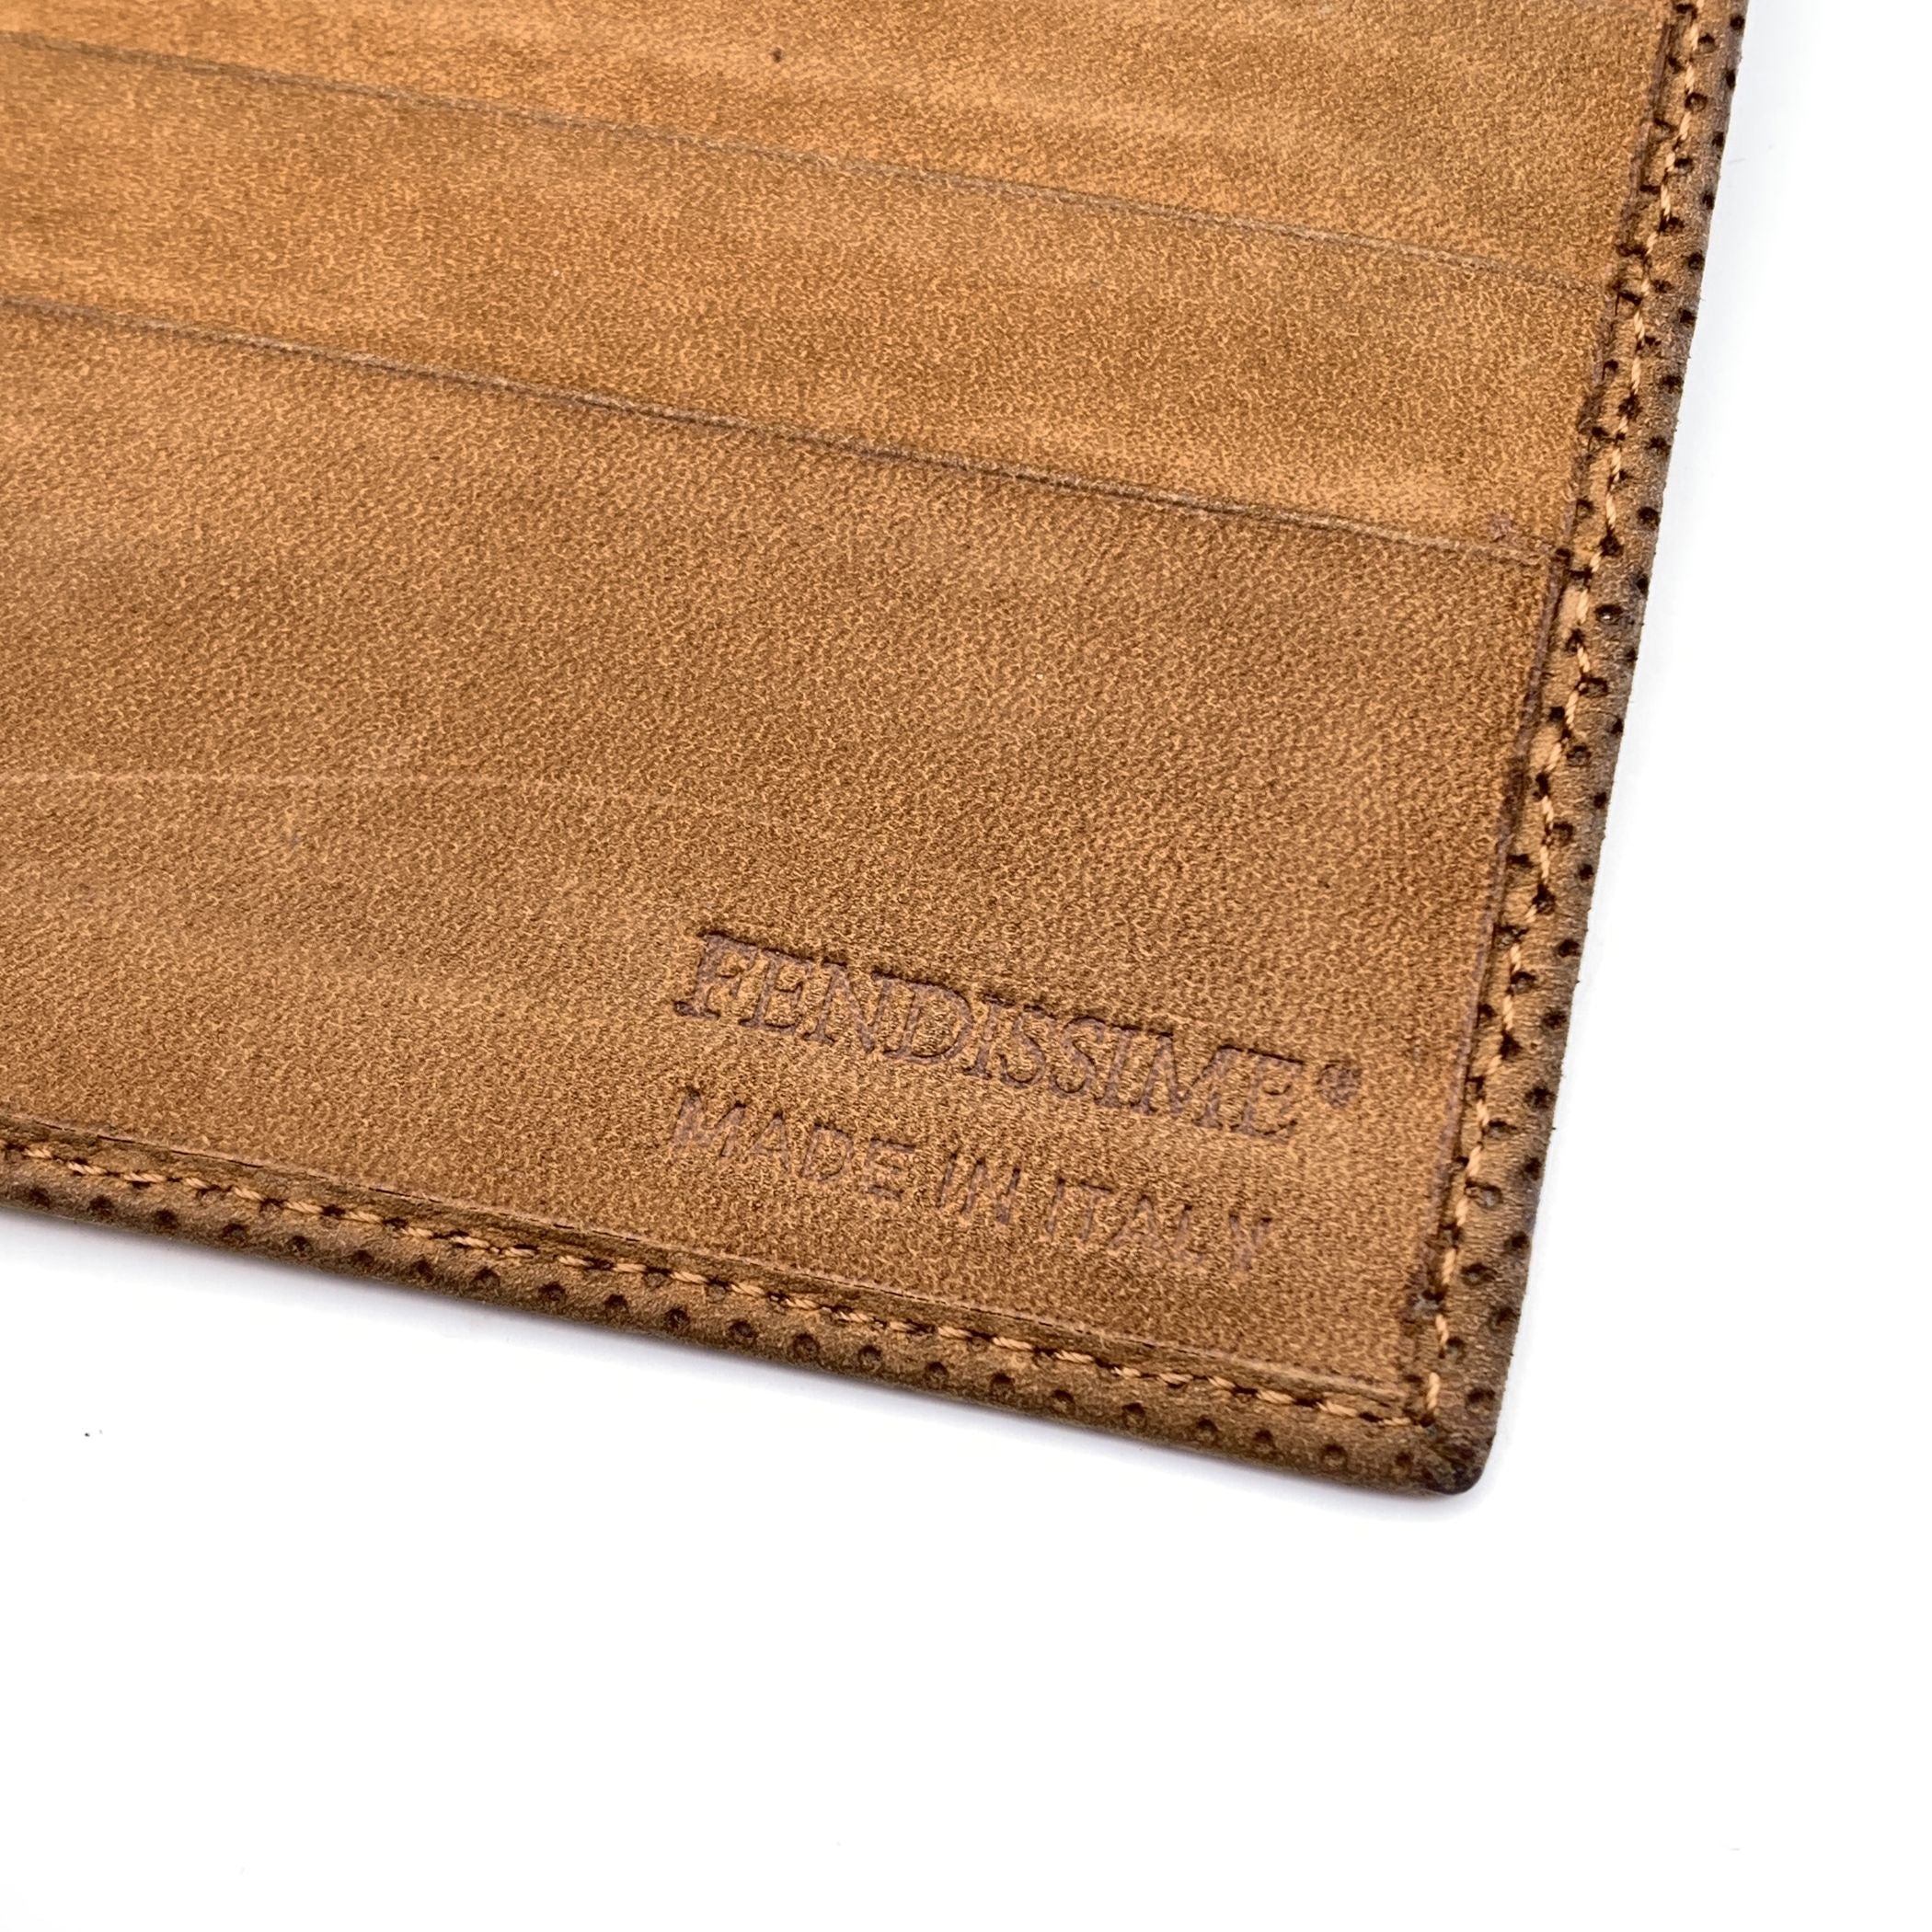 FENDISSIME Wallets -